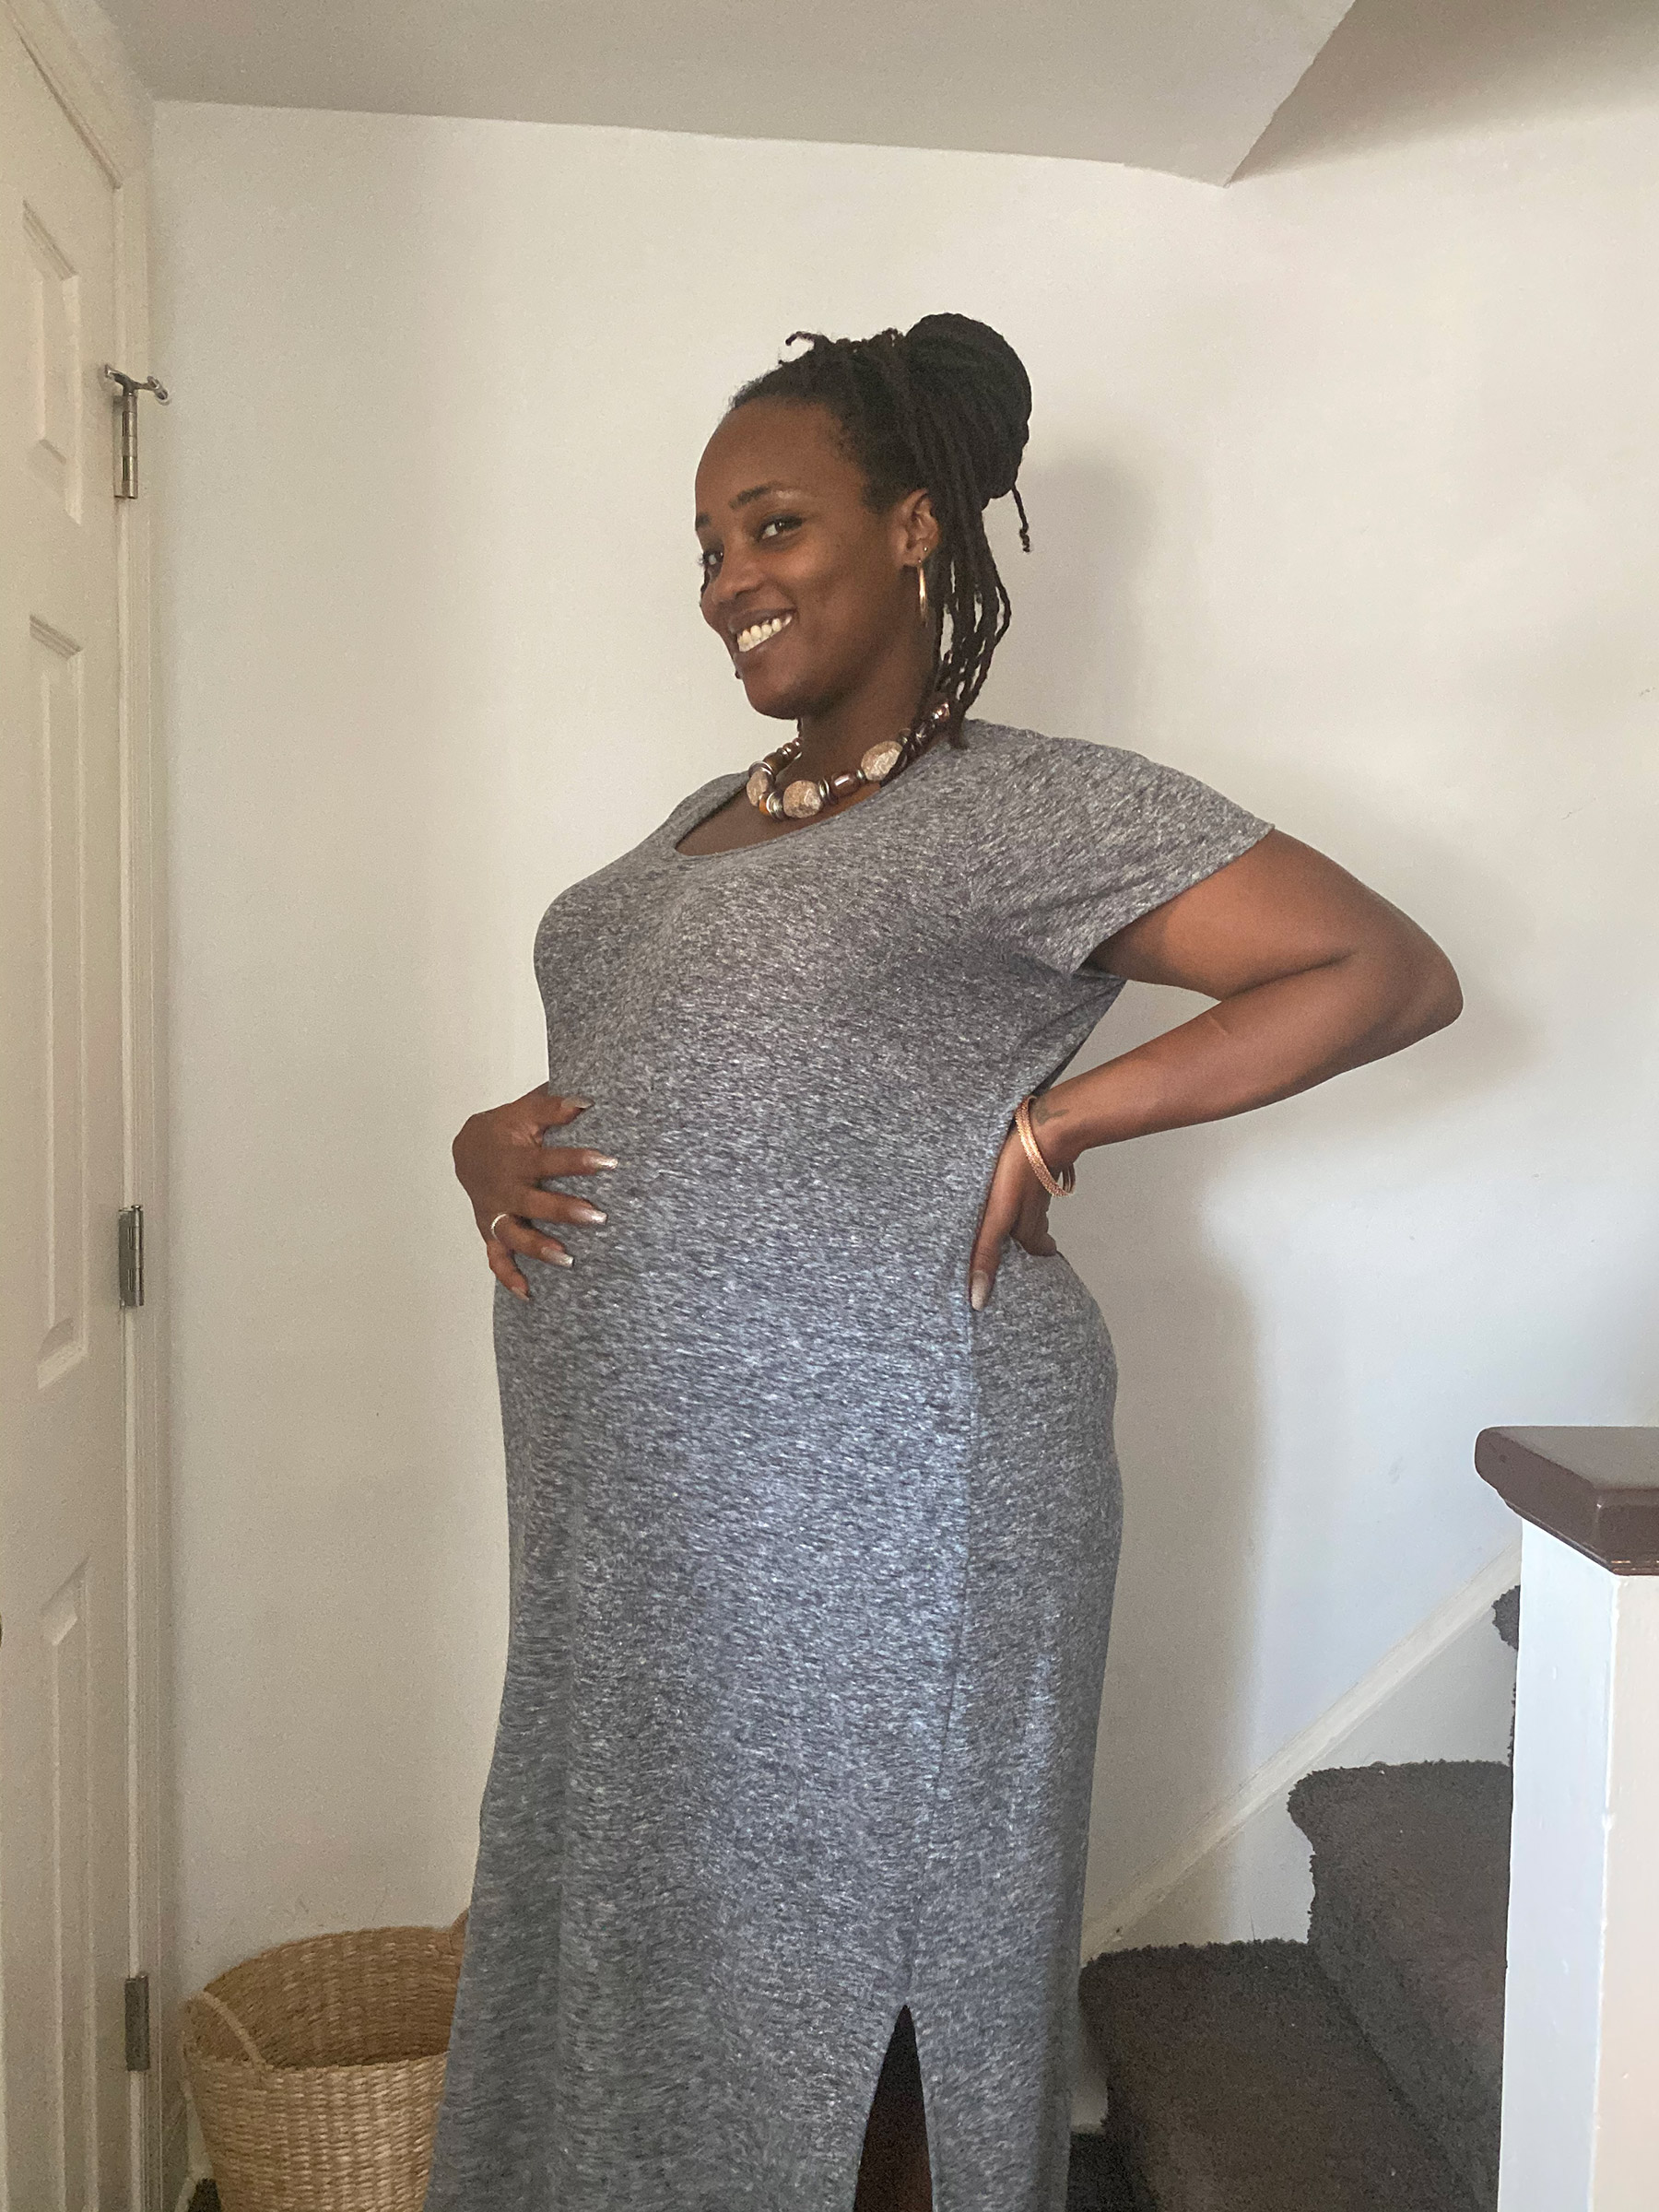 Ciarra ("Ci Ci") Covin, Program Coordinator for The Well Project. She was diagnosed with HIV/AIDS in 2008. She is currently pregnant with her second child. (Courtesy Ciarra Covin)